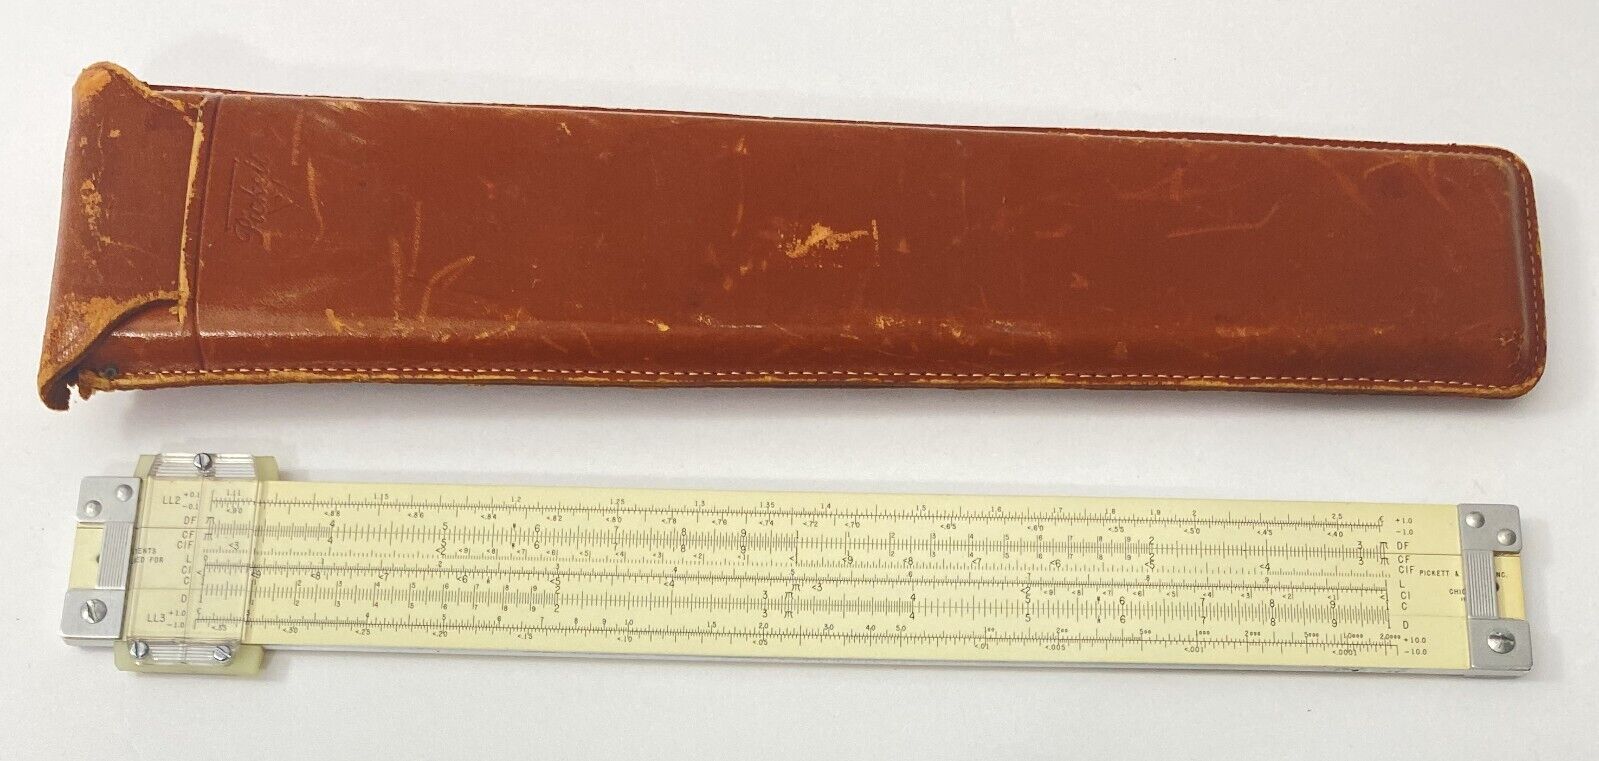 Vintage Pickett & Eckel 800-T Synchro-Scale Slide Rule w/ Leather Case Chicago